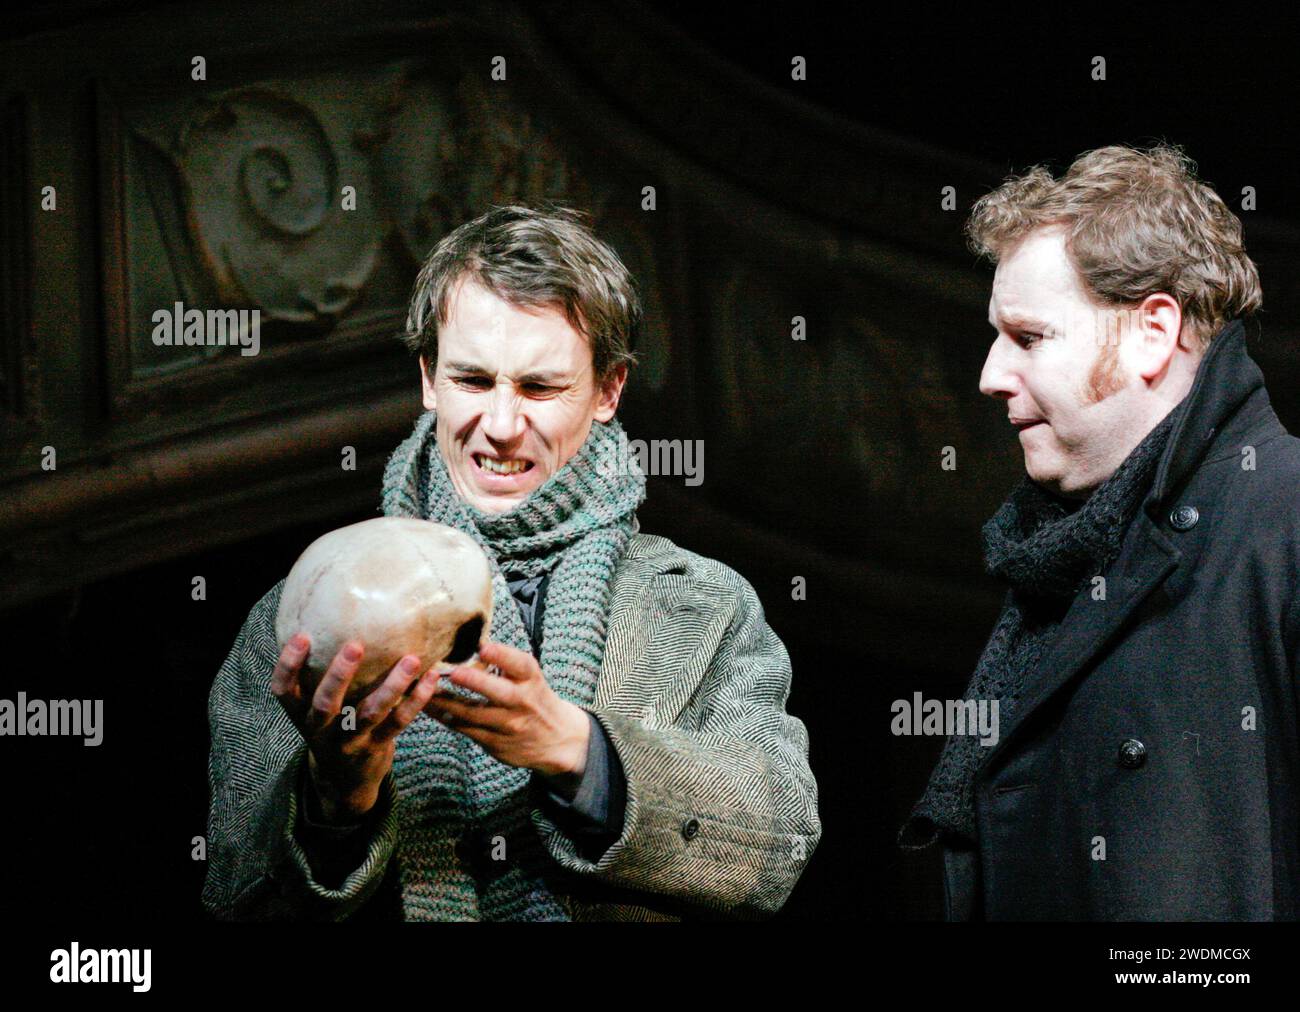 l-r: Tobias Menzies (Hamlet), David Ganly (Horatio) in HAMLET by Shakespeare at the Royal Theatre, Northampton, England  22/03/2005  design: Laura Hopkins  lighting: Mark Jonathan  fights: Terry King  director: Rupert Goold Stock Photo